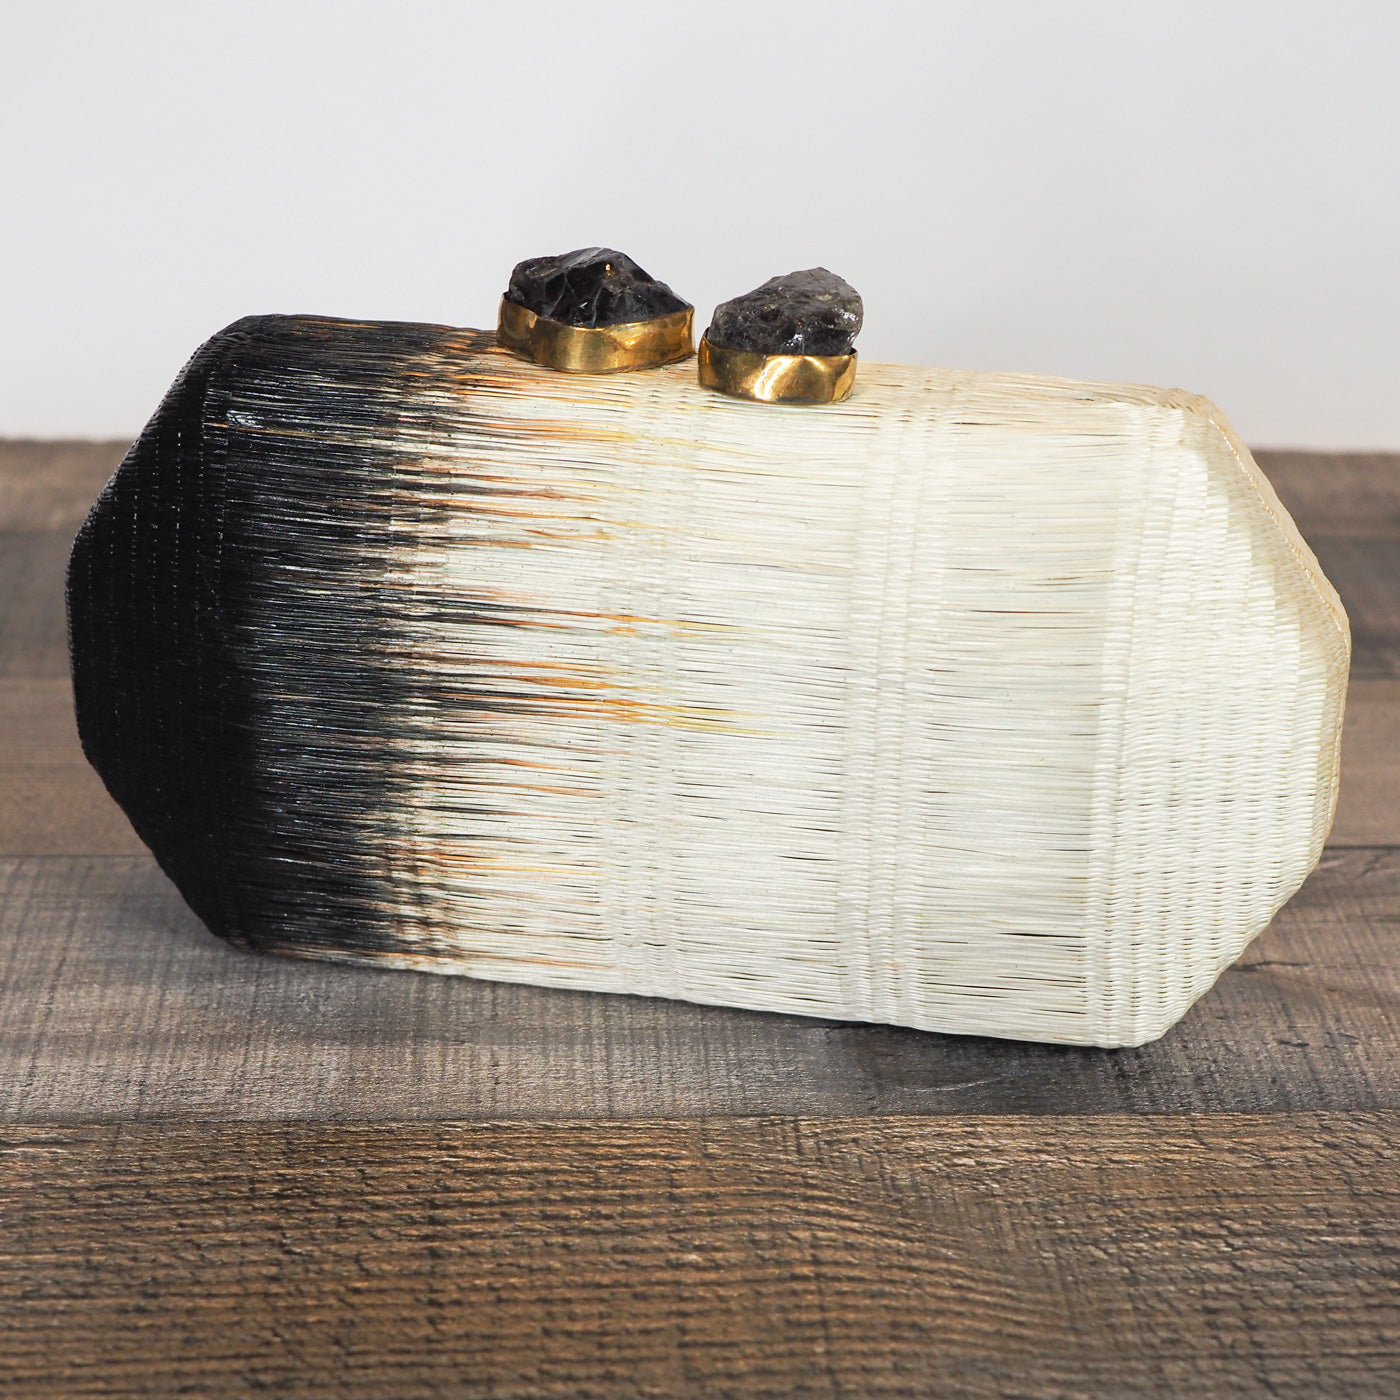 Handloomed clutch made from natural plant fibers carefully extracted from the stalks of the tropical buri palm in the Philippines and finished with a beautiful quartz stone closure. - 